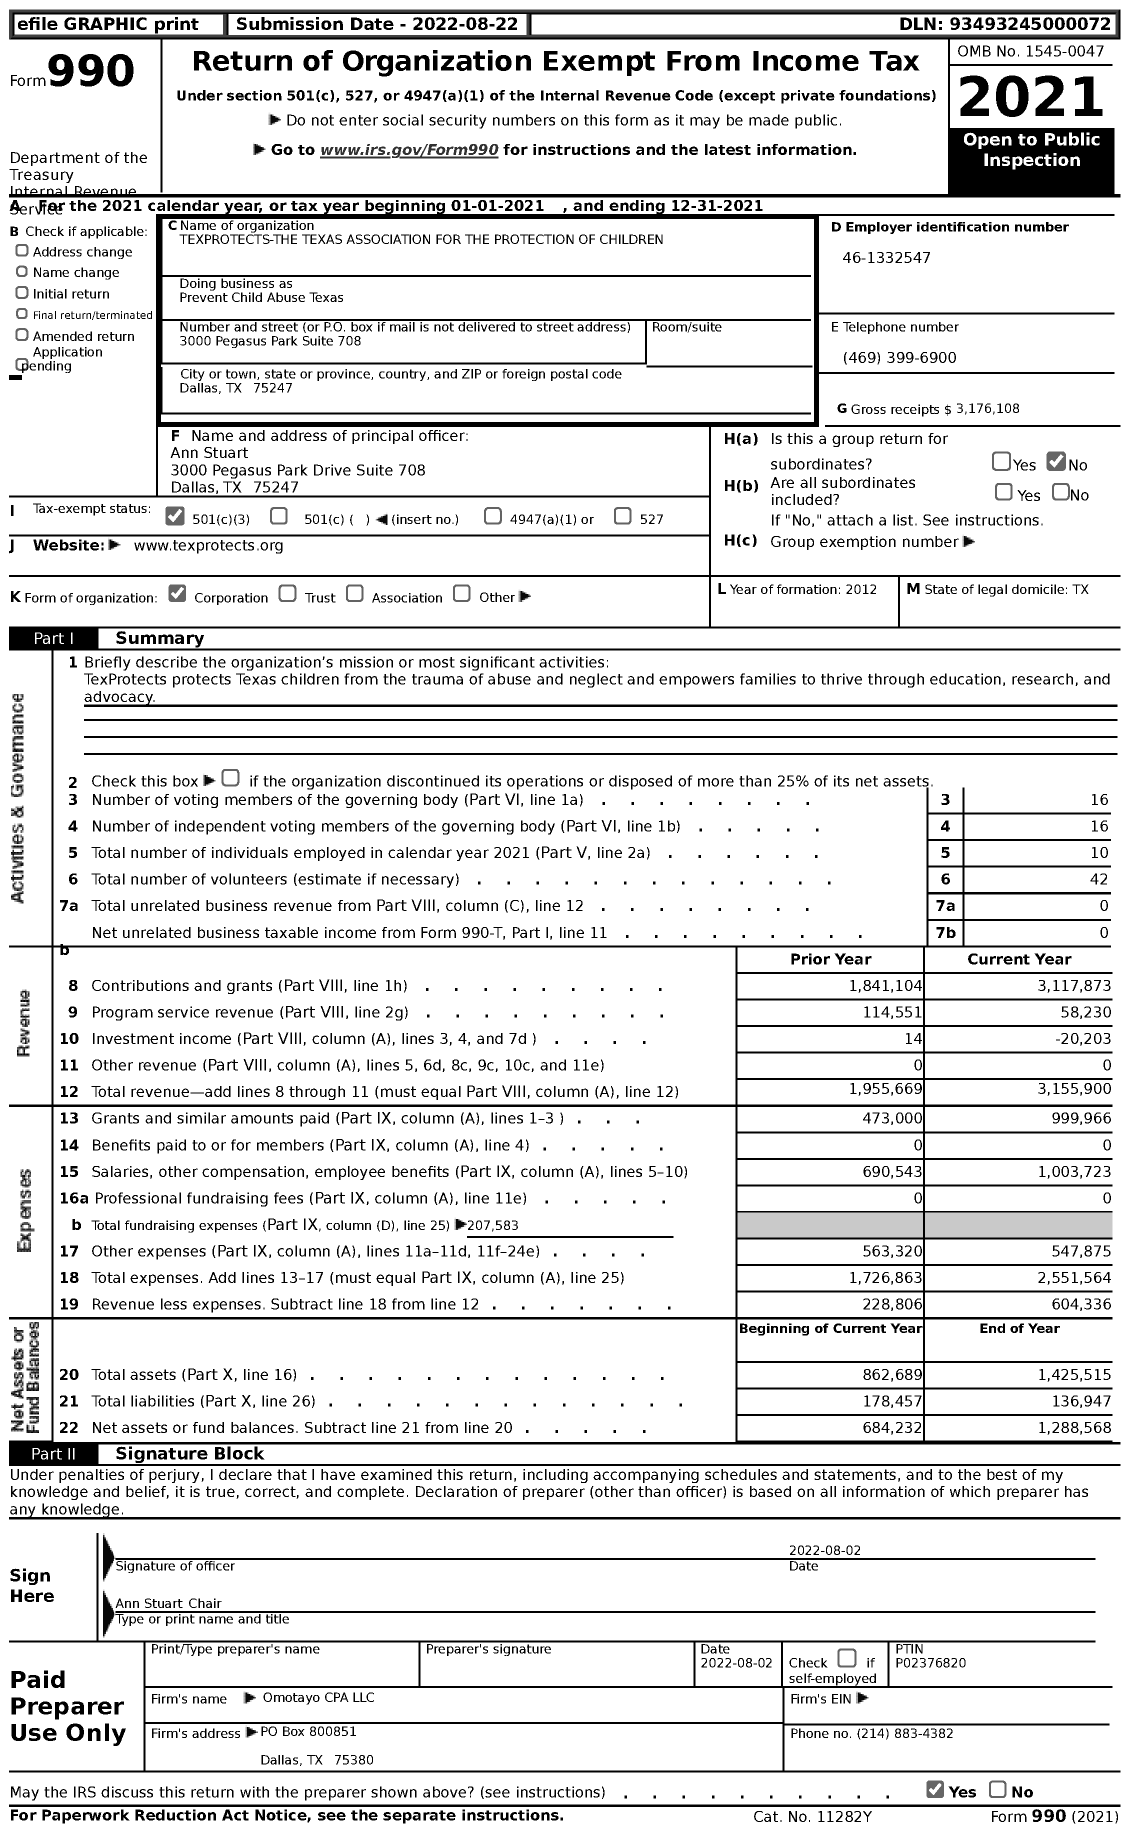 Image of first page of 2021 Form 990 for Prevent Child Abuse Texas / Texprotects-The Texas Association for the Protection of Children